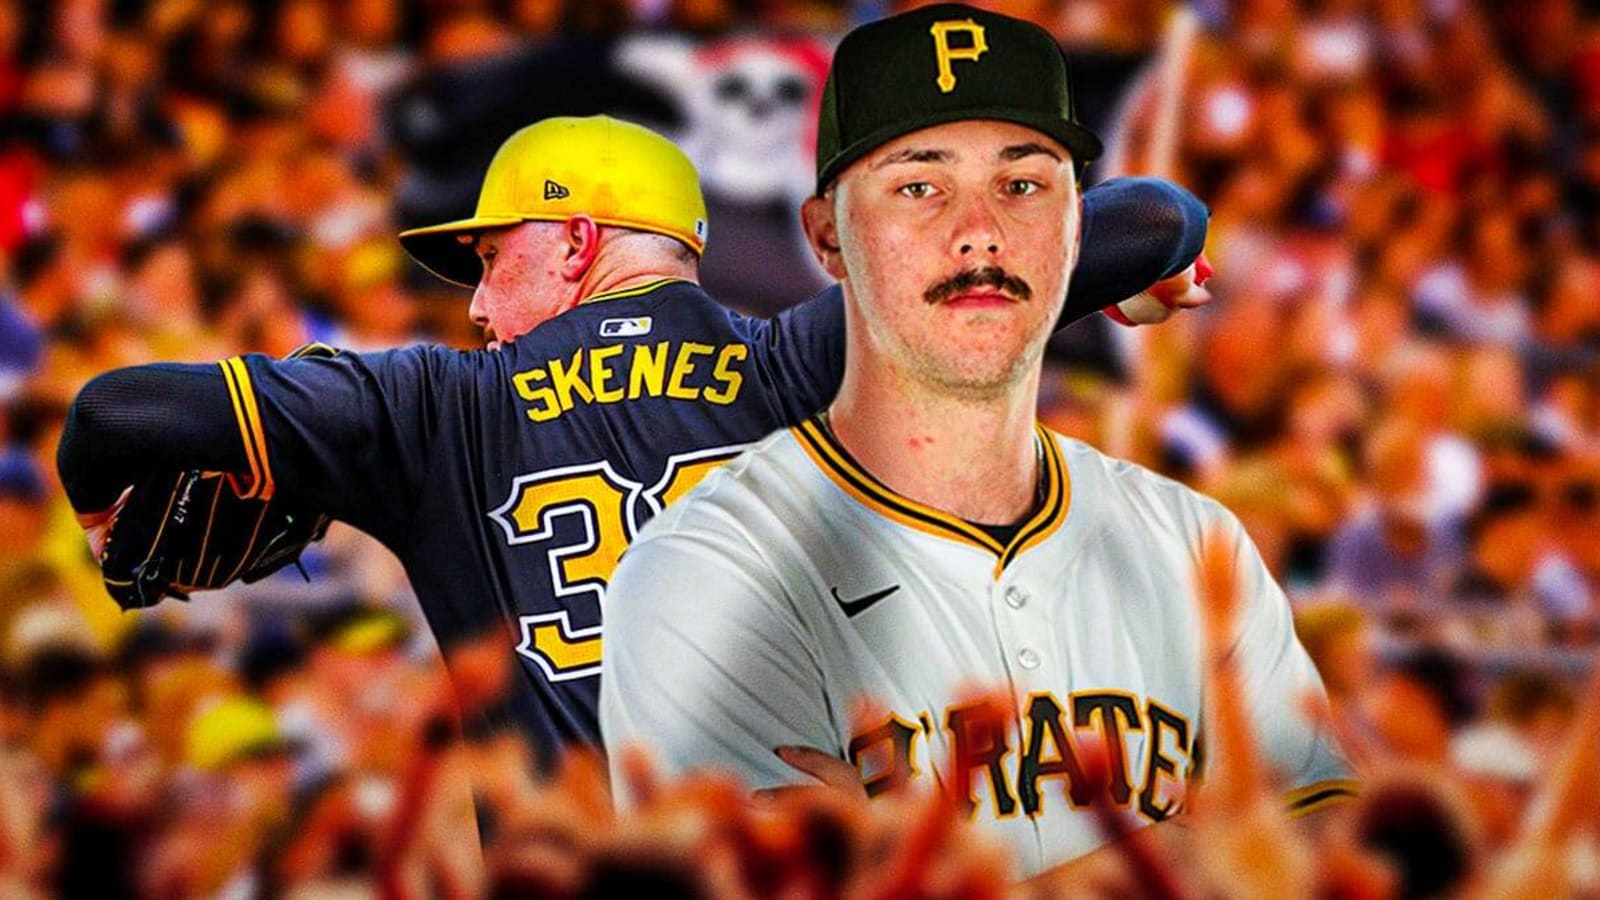 Why Paul Skenes means everything to Pirates after decades of irrelevance